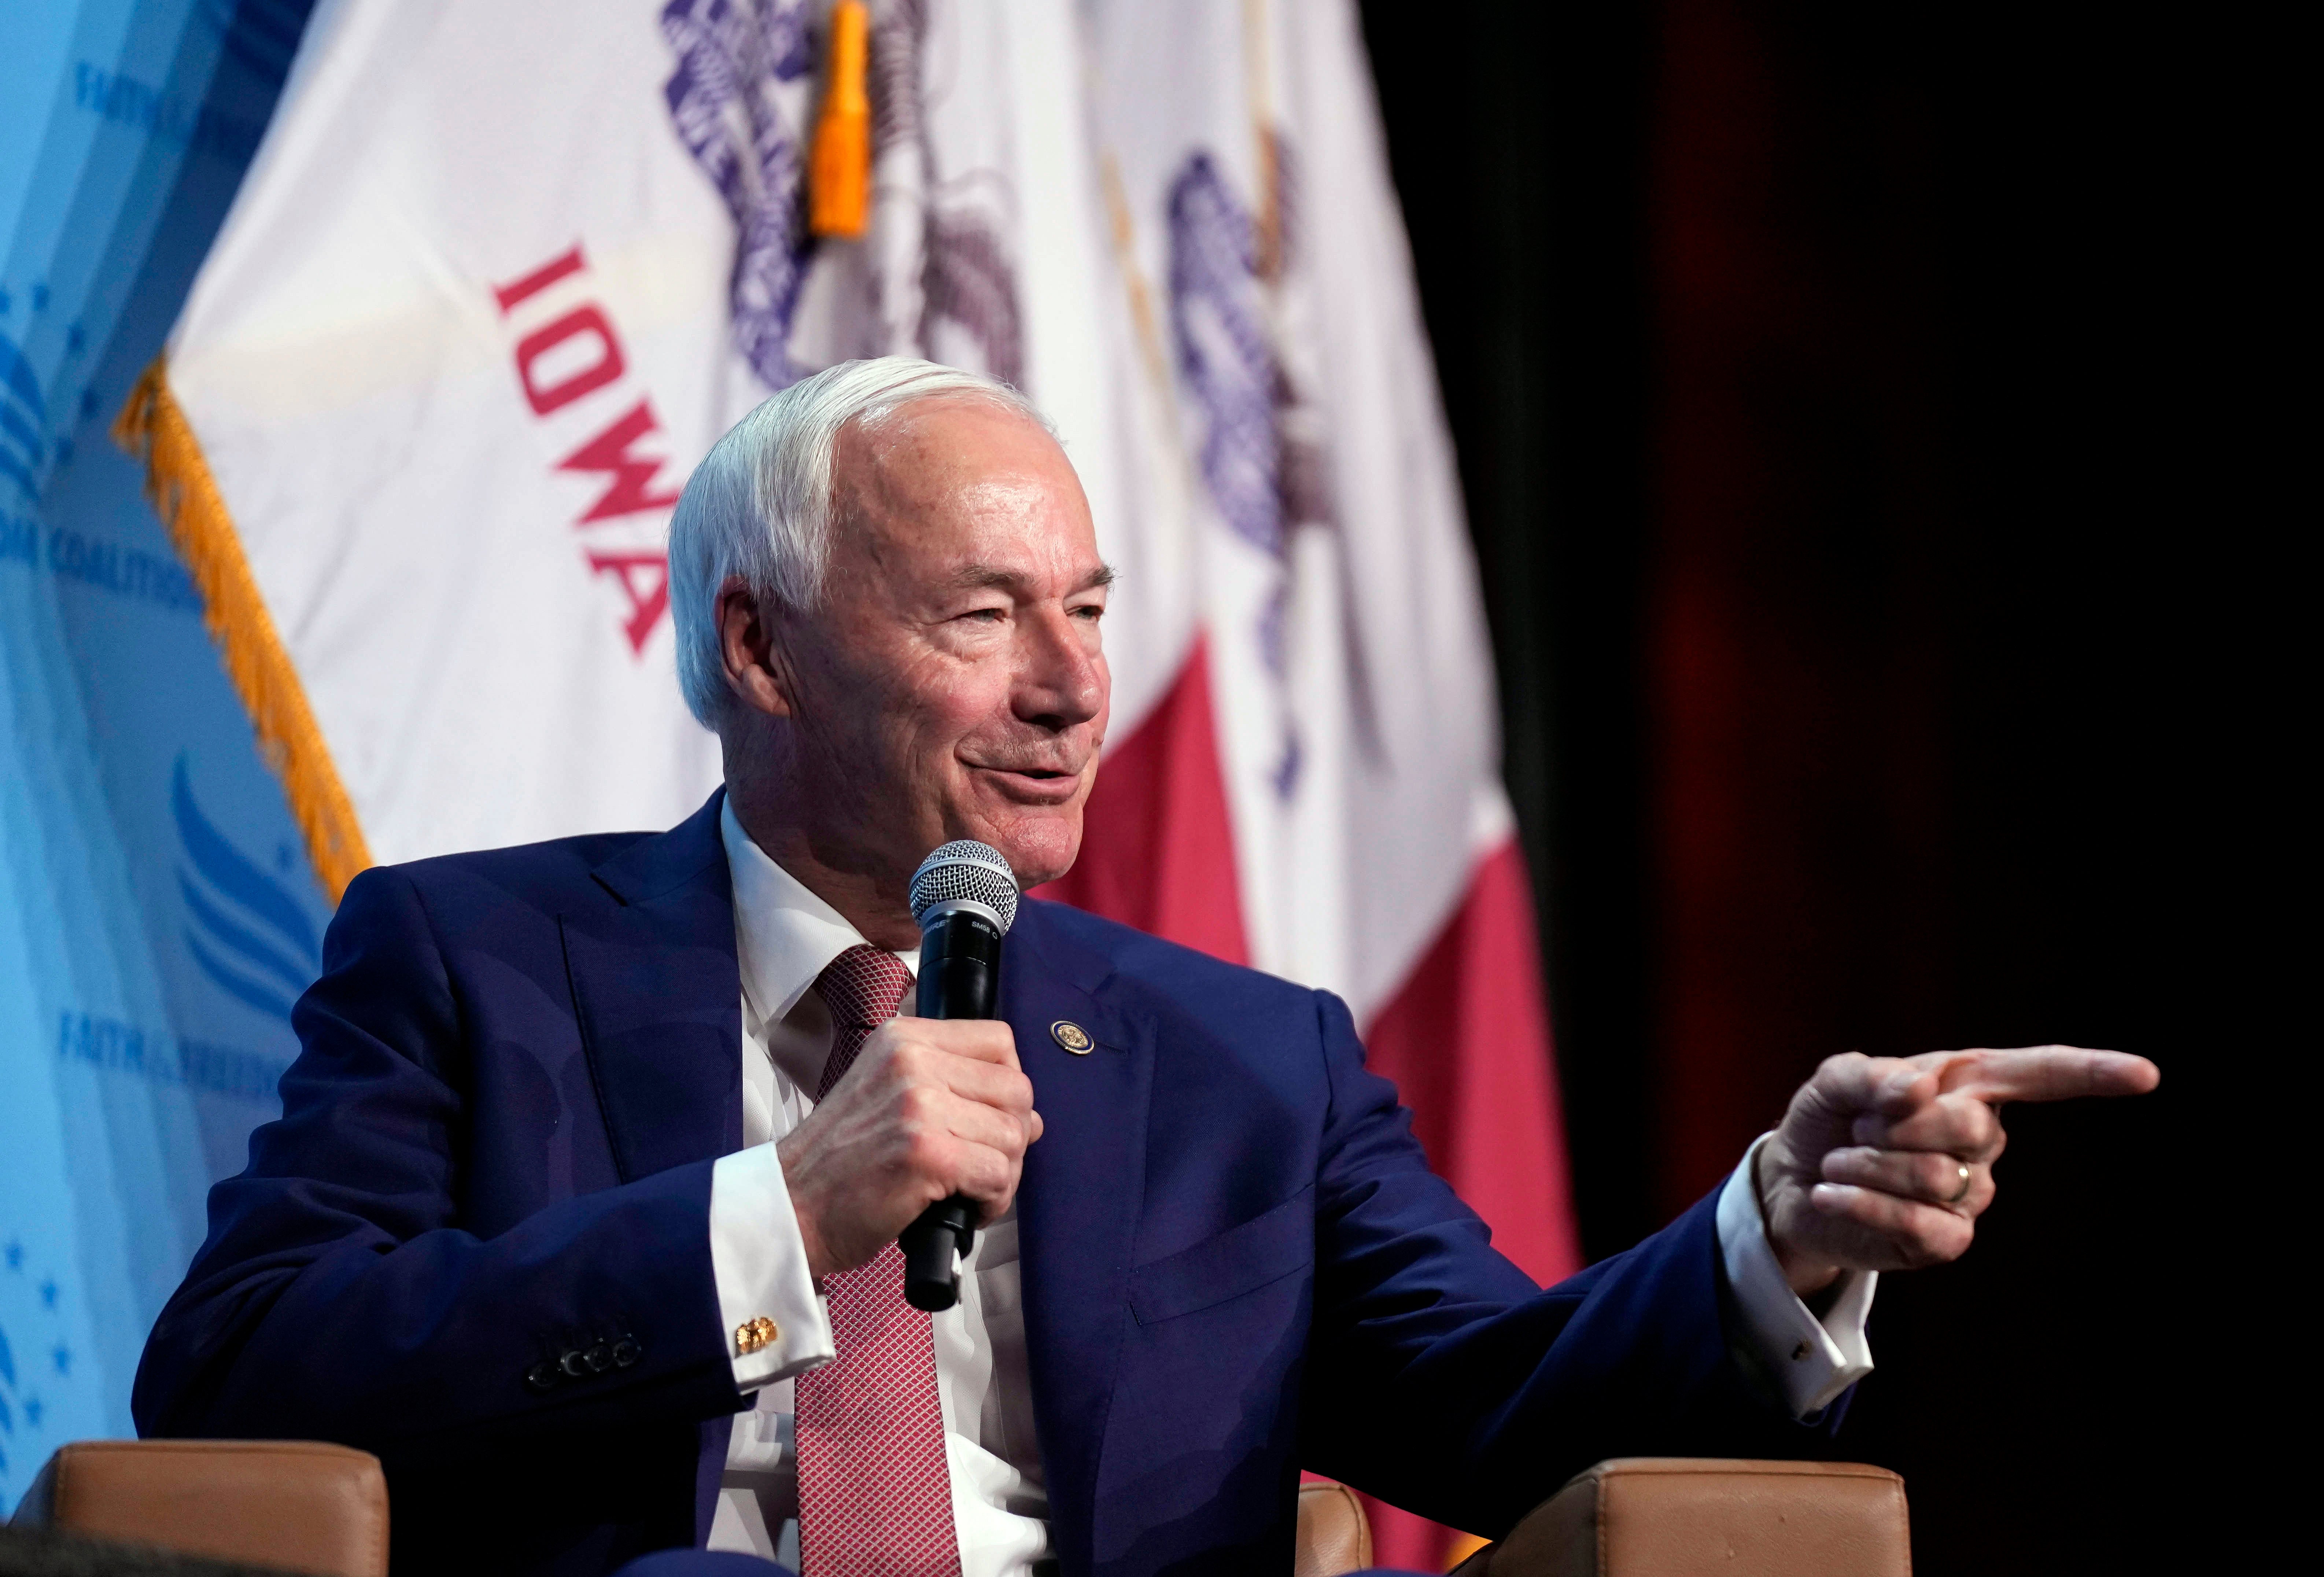 ‘Labor unions have played an important role in our nation’s history,’ Asa Hutchinson has said